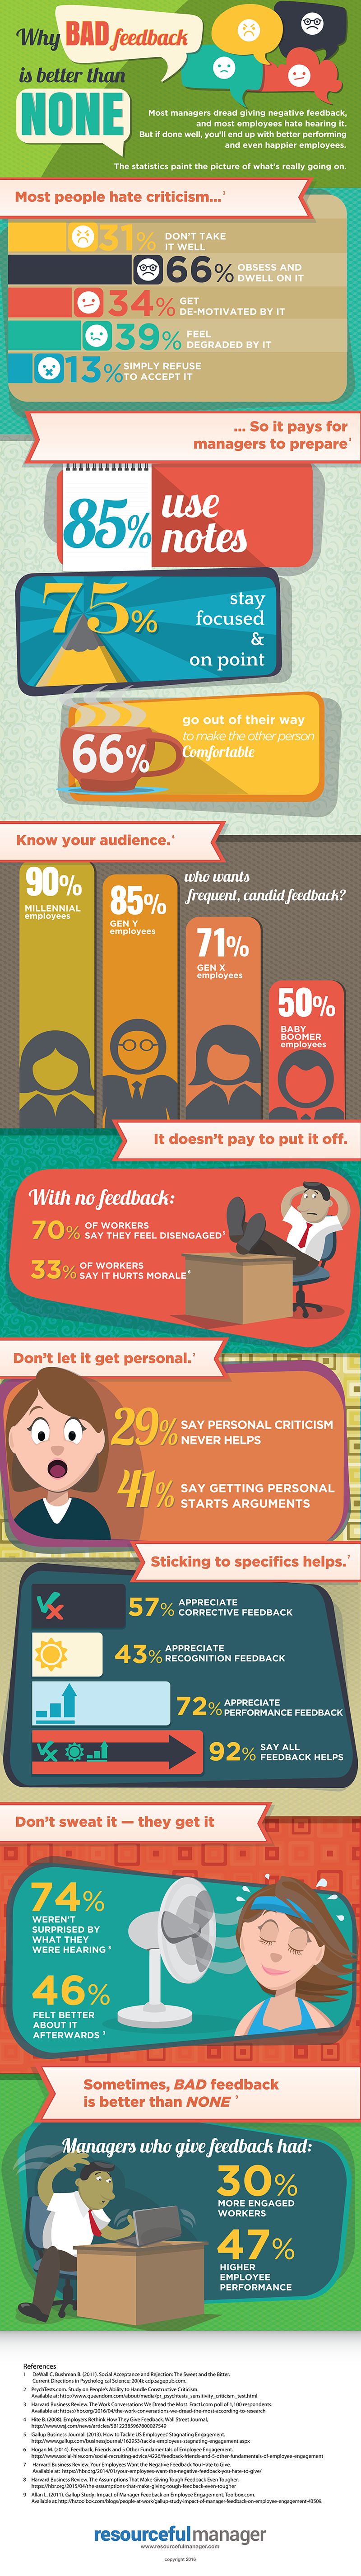 bad-feedback-better-infographic.png